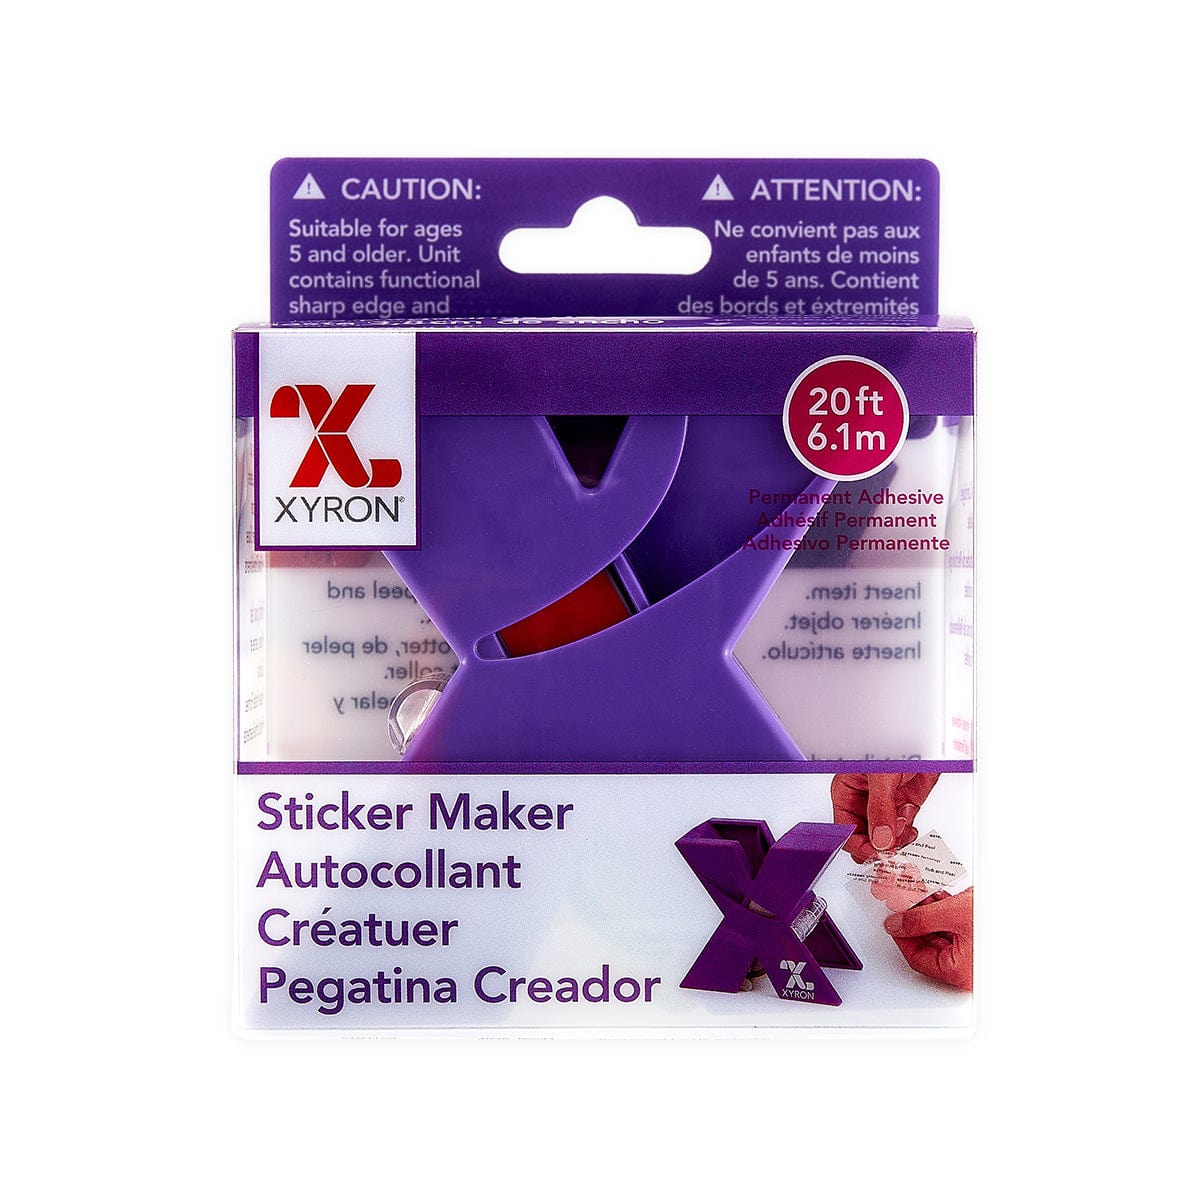 How to Use the Xyron Sticker Maker 